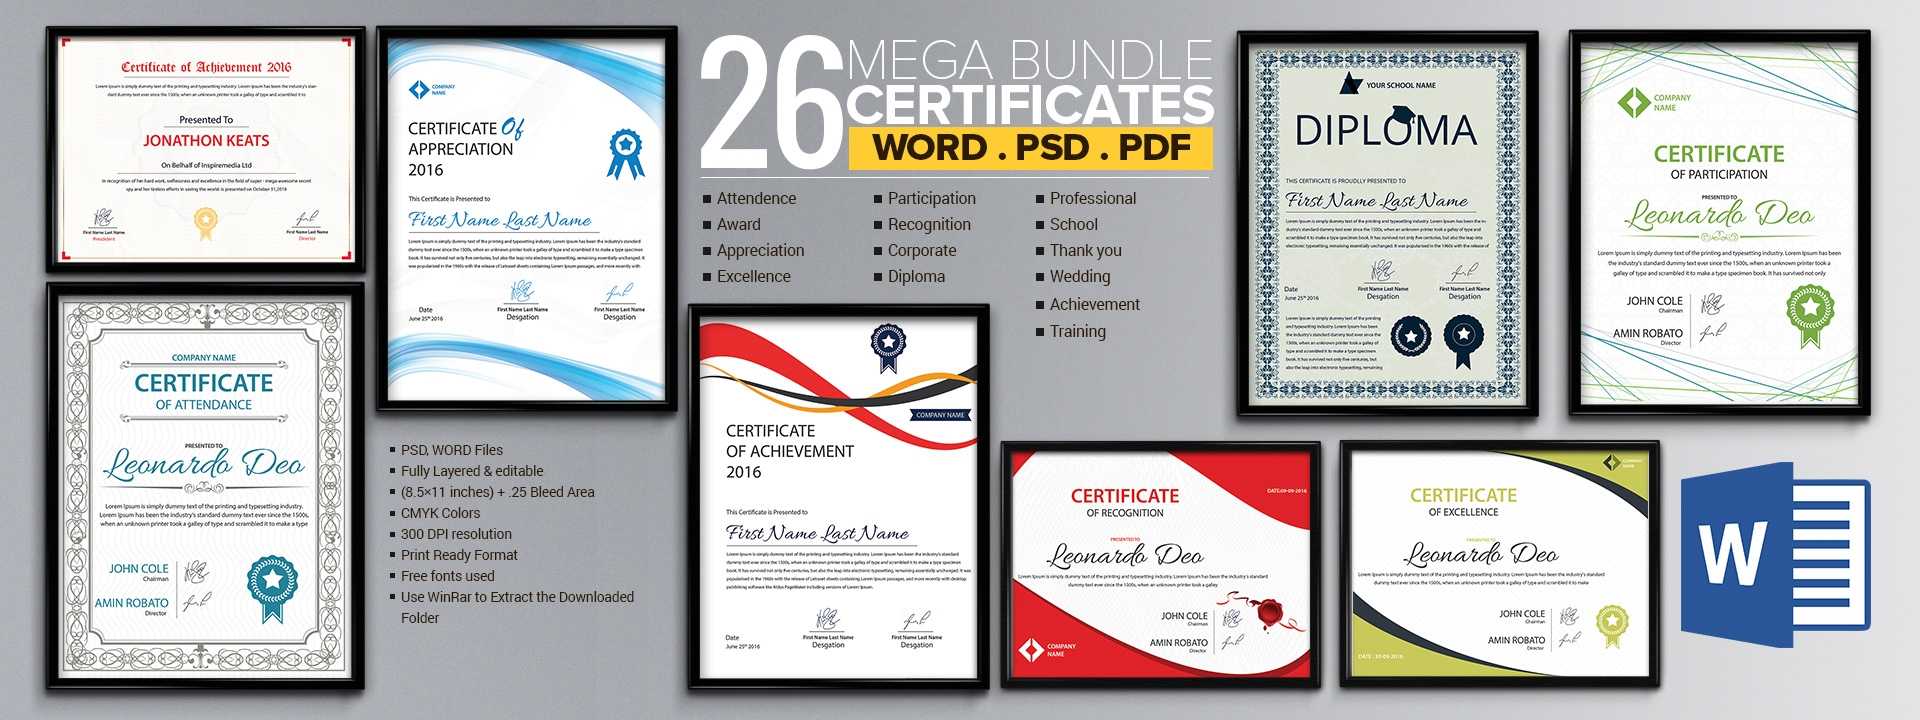 Word Certificate Template - 53+ Free Download Samples With Regard To Free Certificate Templates For Word 2007